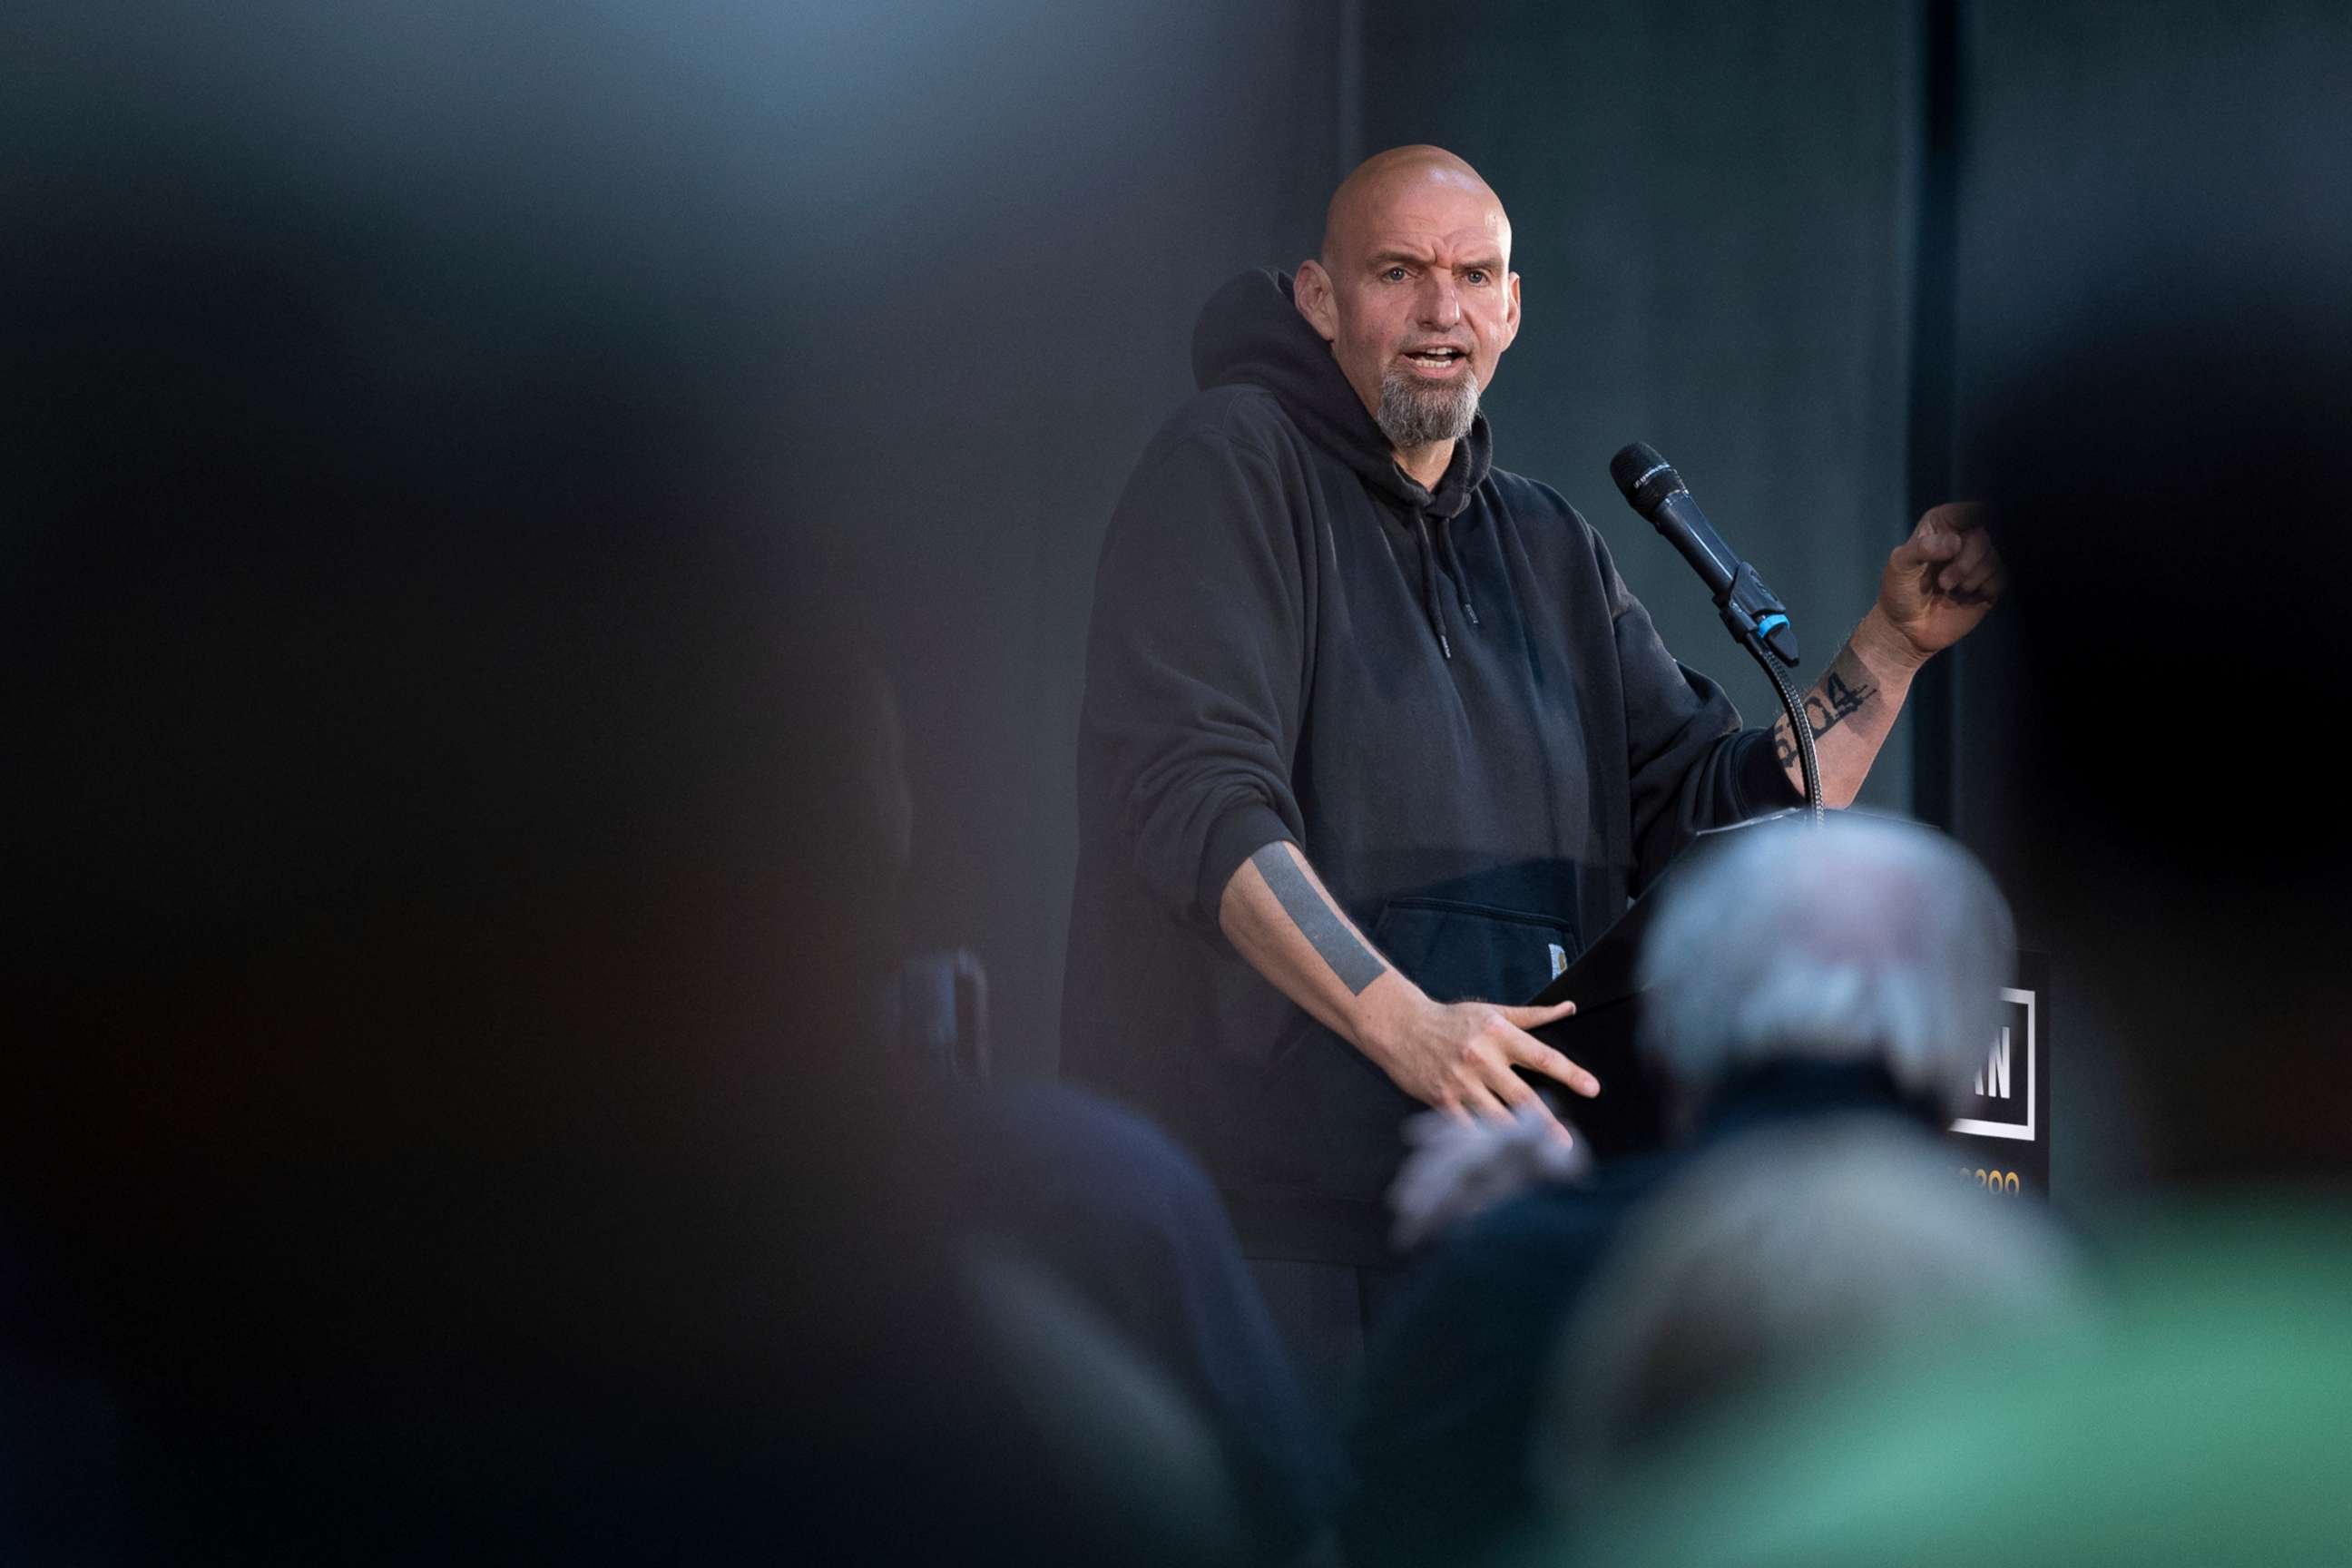 PHOTO: Pennsylvania Lt. Gov. and Democratic candidate for U.S. Senate John Fetterman speaks at a rally at Riverfront Sports in Scranton, Pa., Sept. 17, 2022.